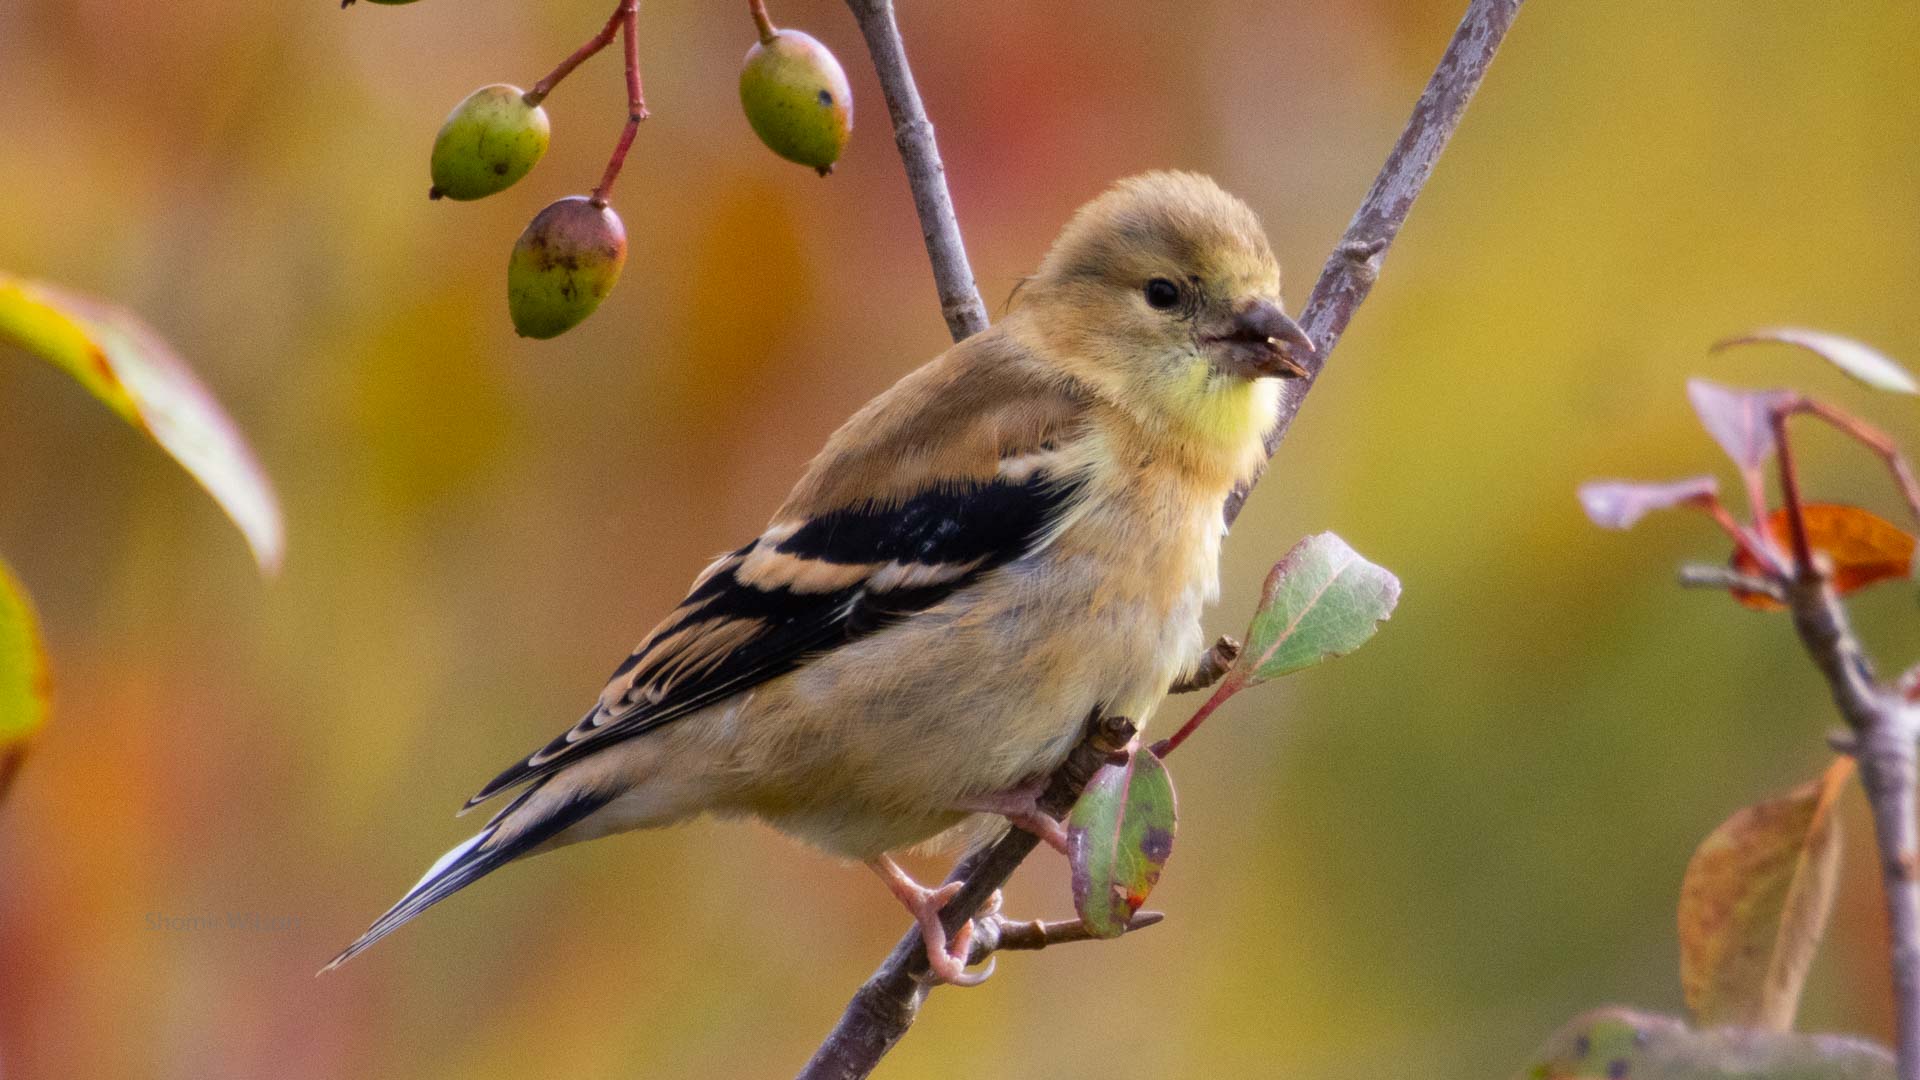 yellow, brown, and black bird on a twig with green berries